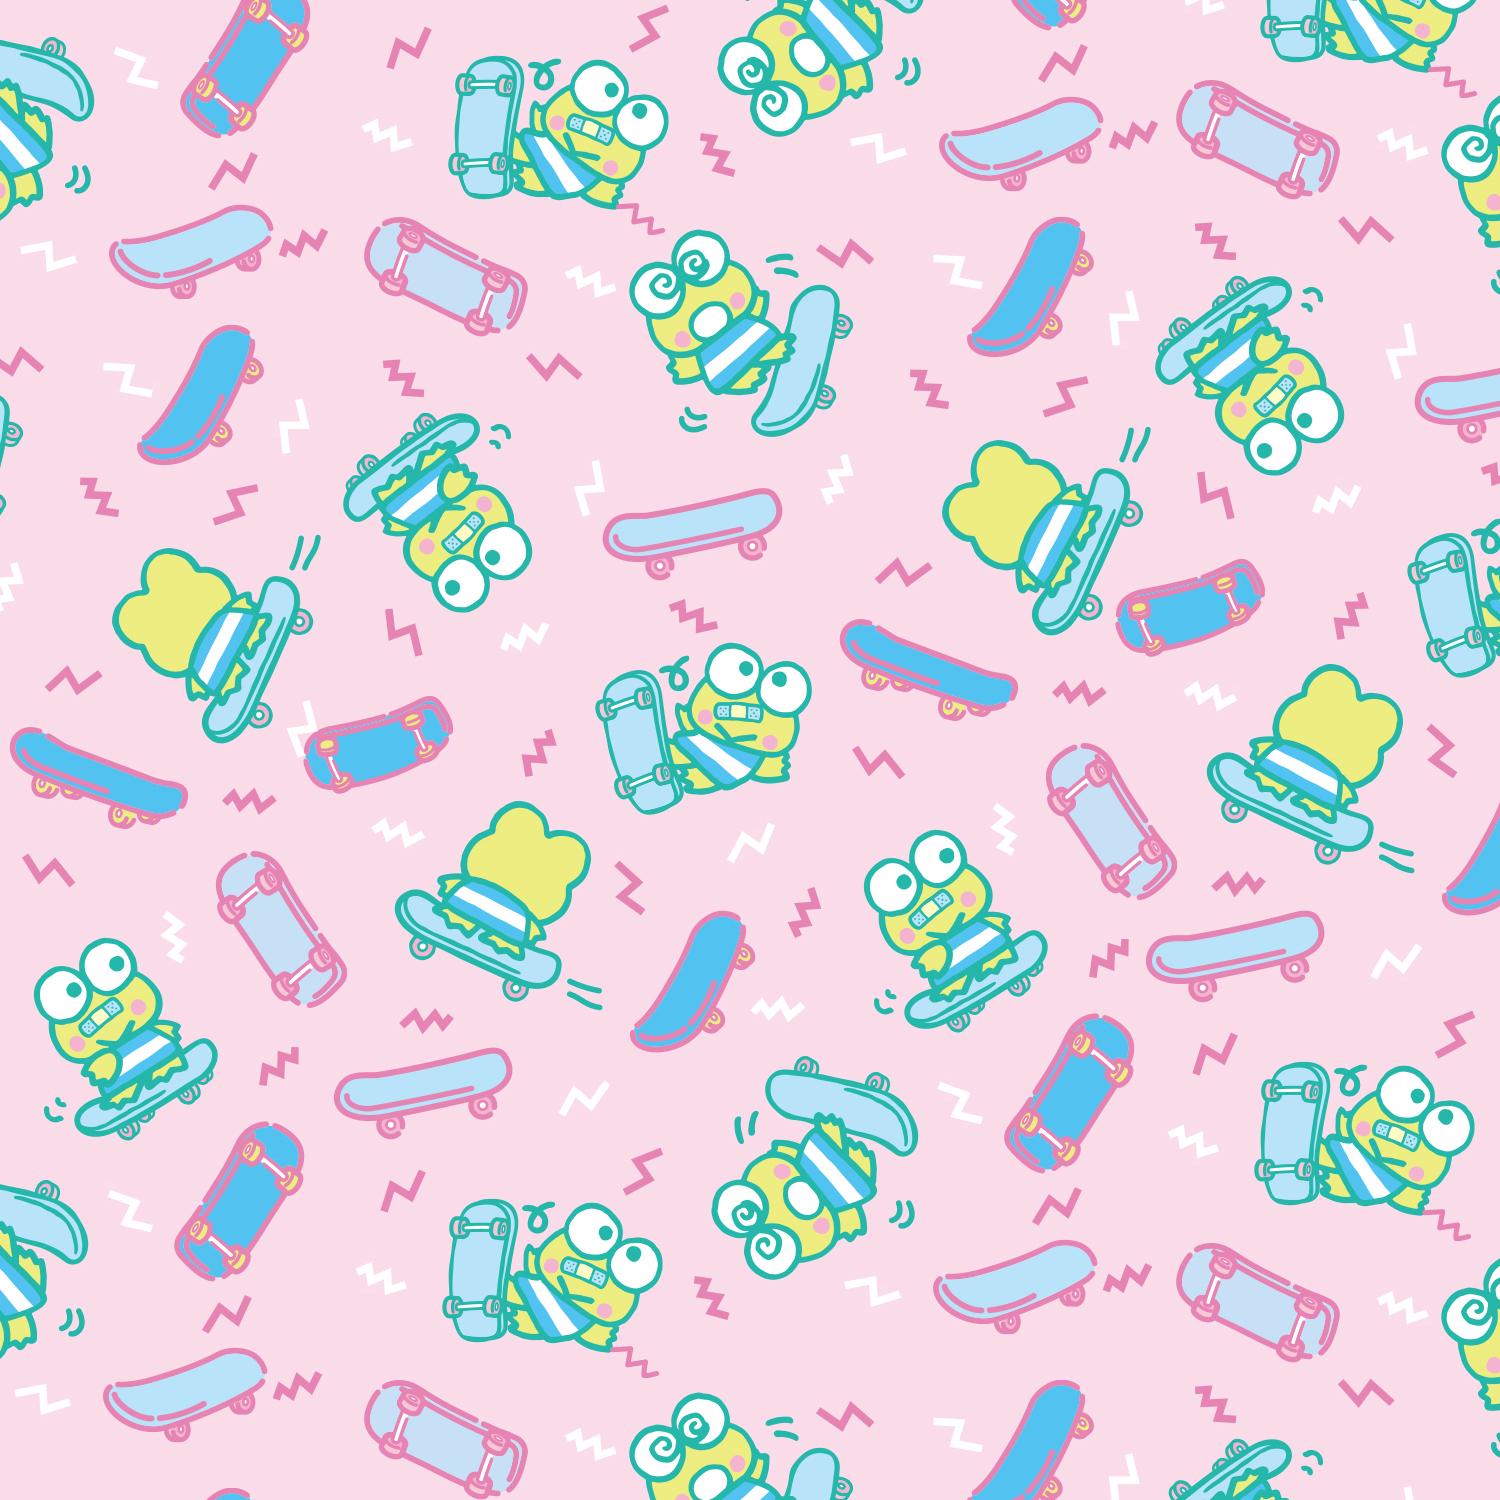 A repeating pattern of cartoon characters and skateboards on a pink background - Keroppi